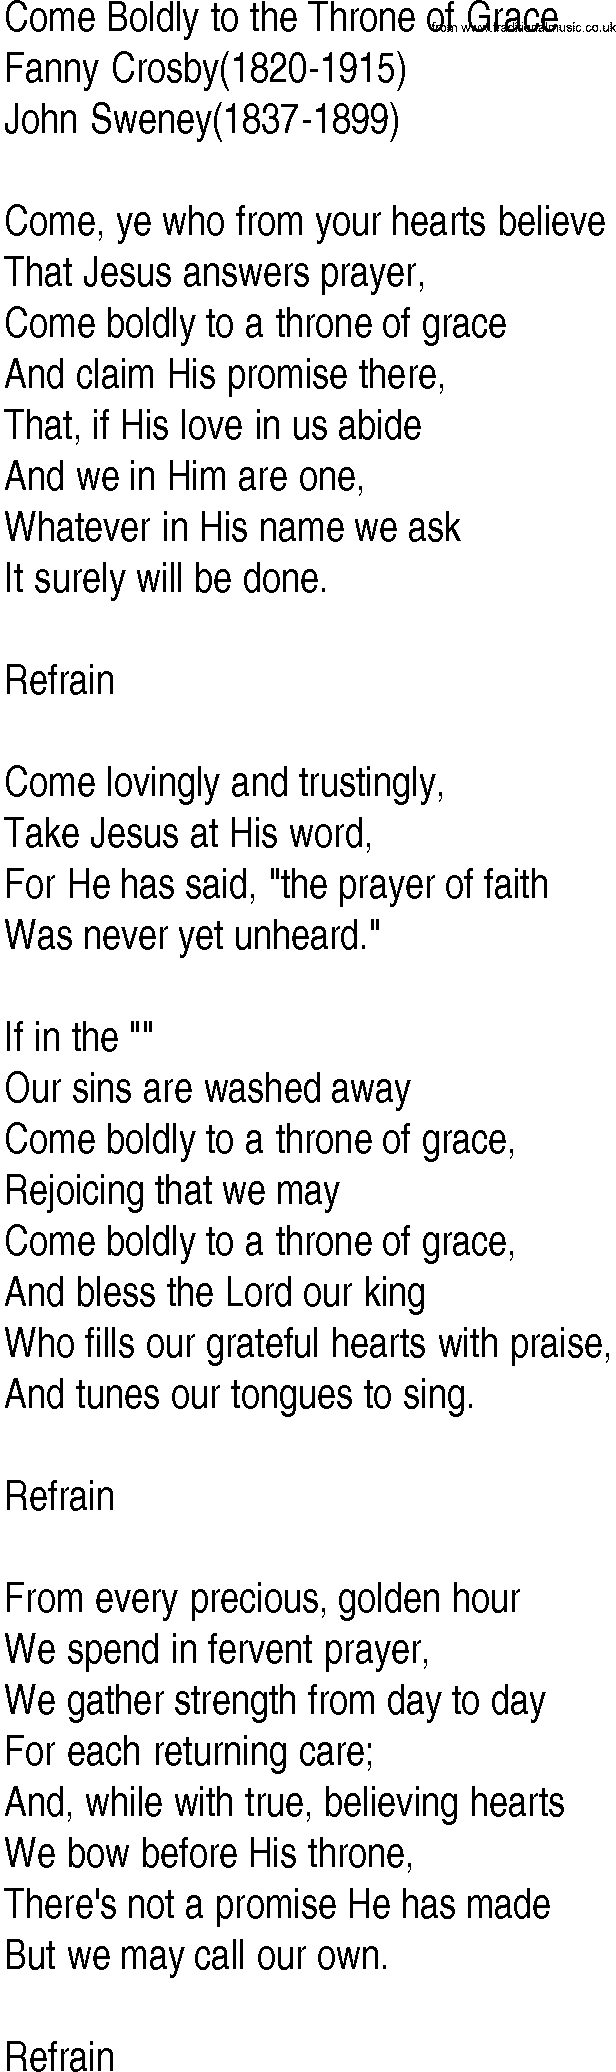 Hymn and Gospel Song: Come Boldly to the Throne of Grace by Fanny Crosby lyrics